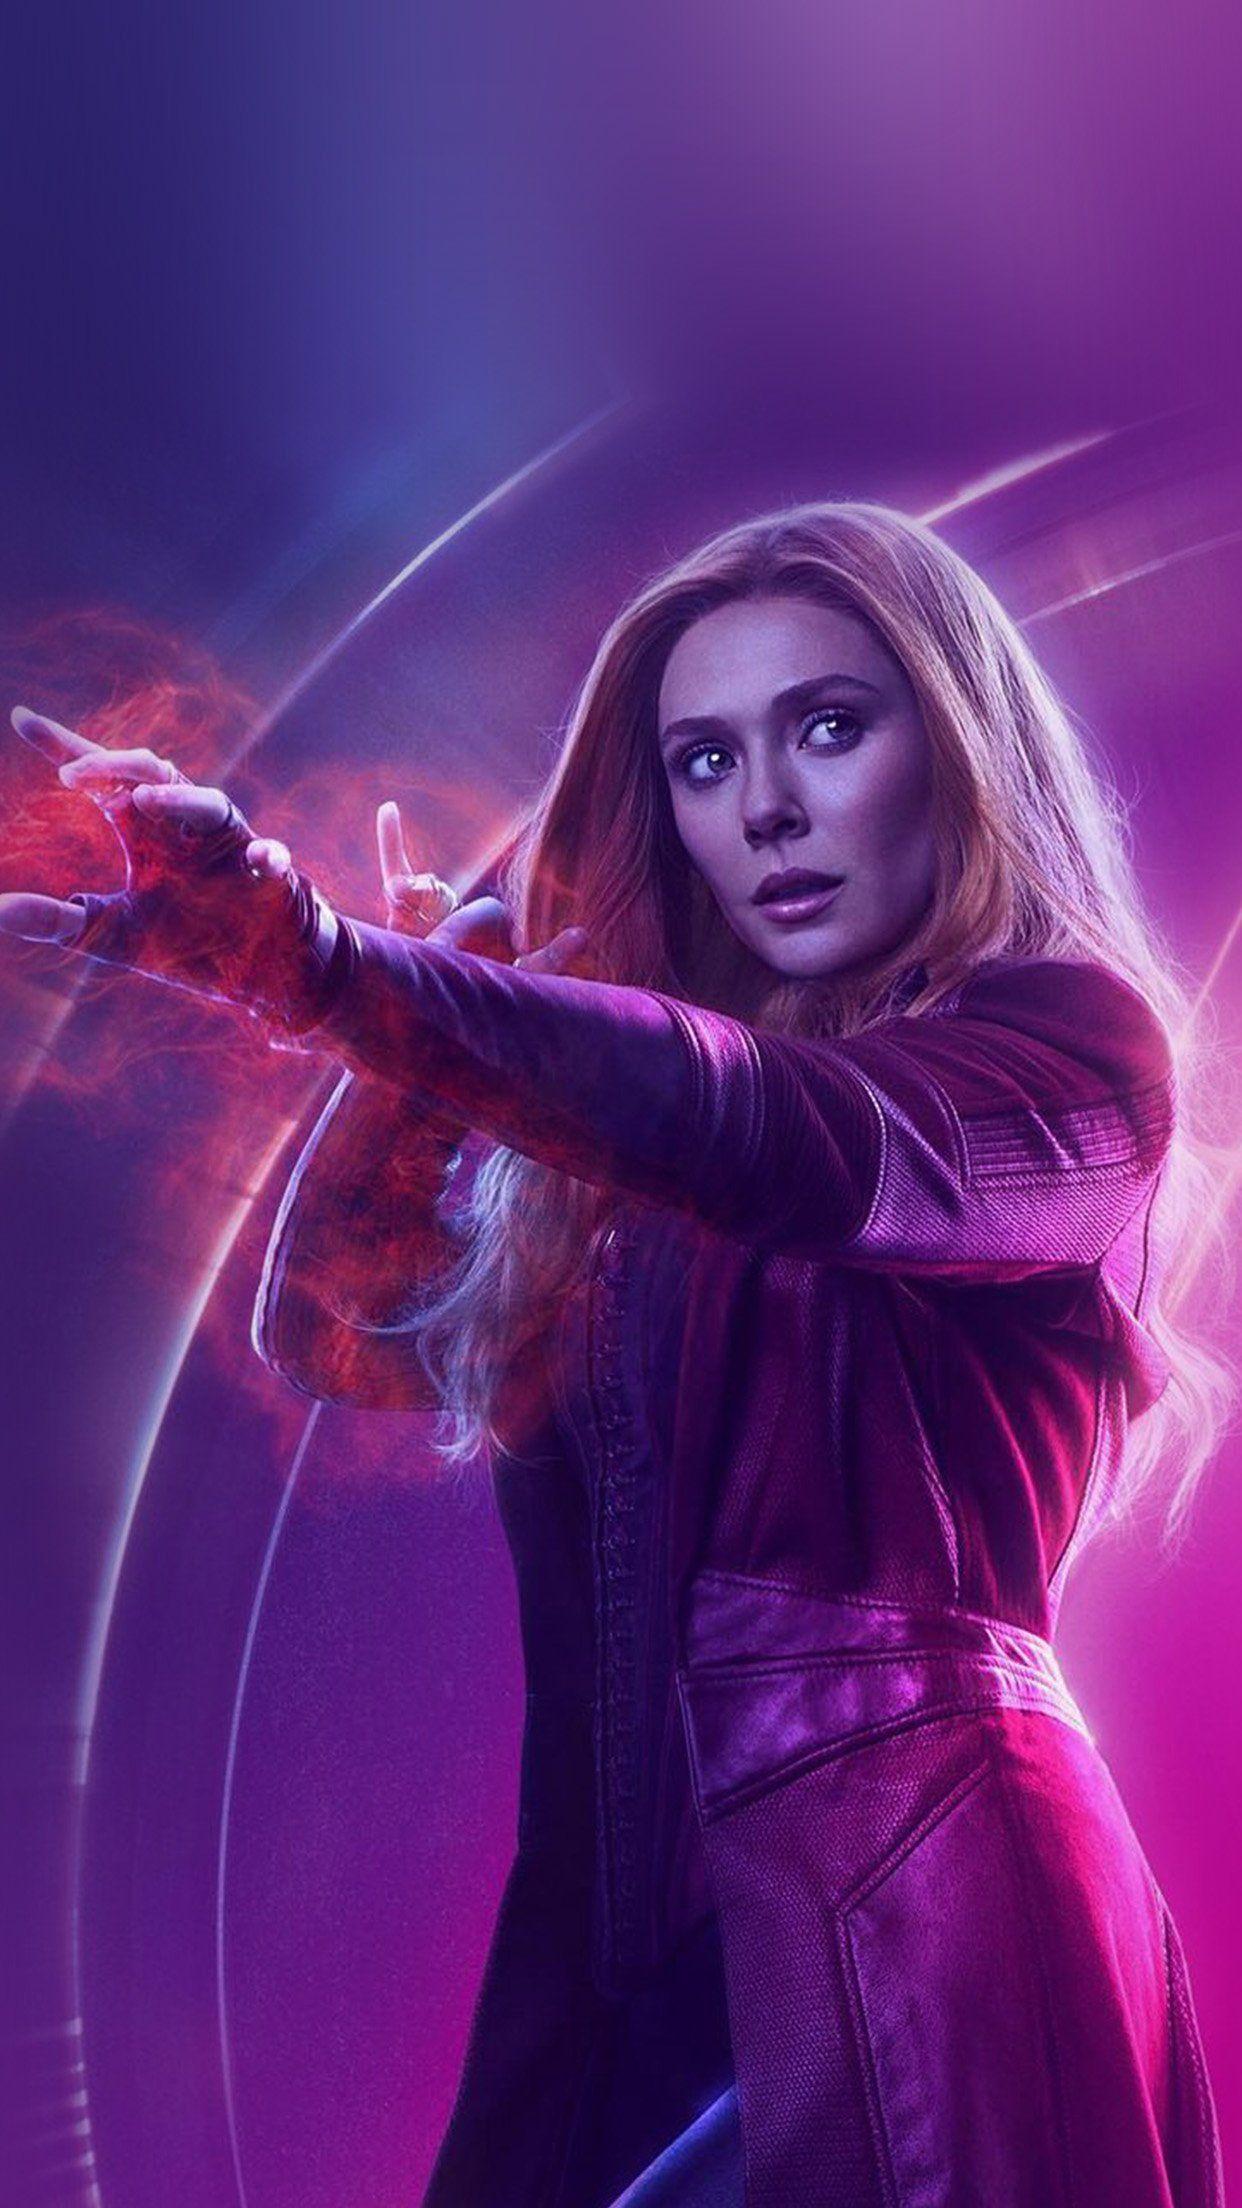 Wanda as Scarlet Witch 5k Ultra HD ID 7434 iPhone Wallpapers Free Download